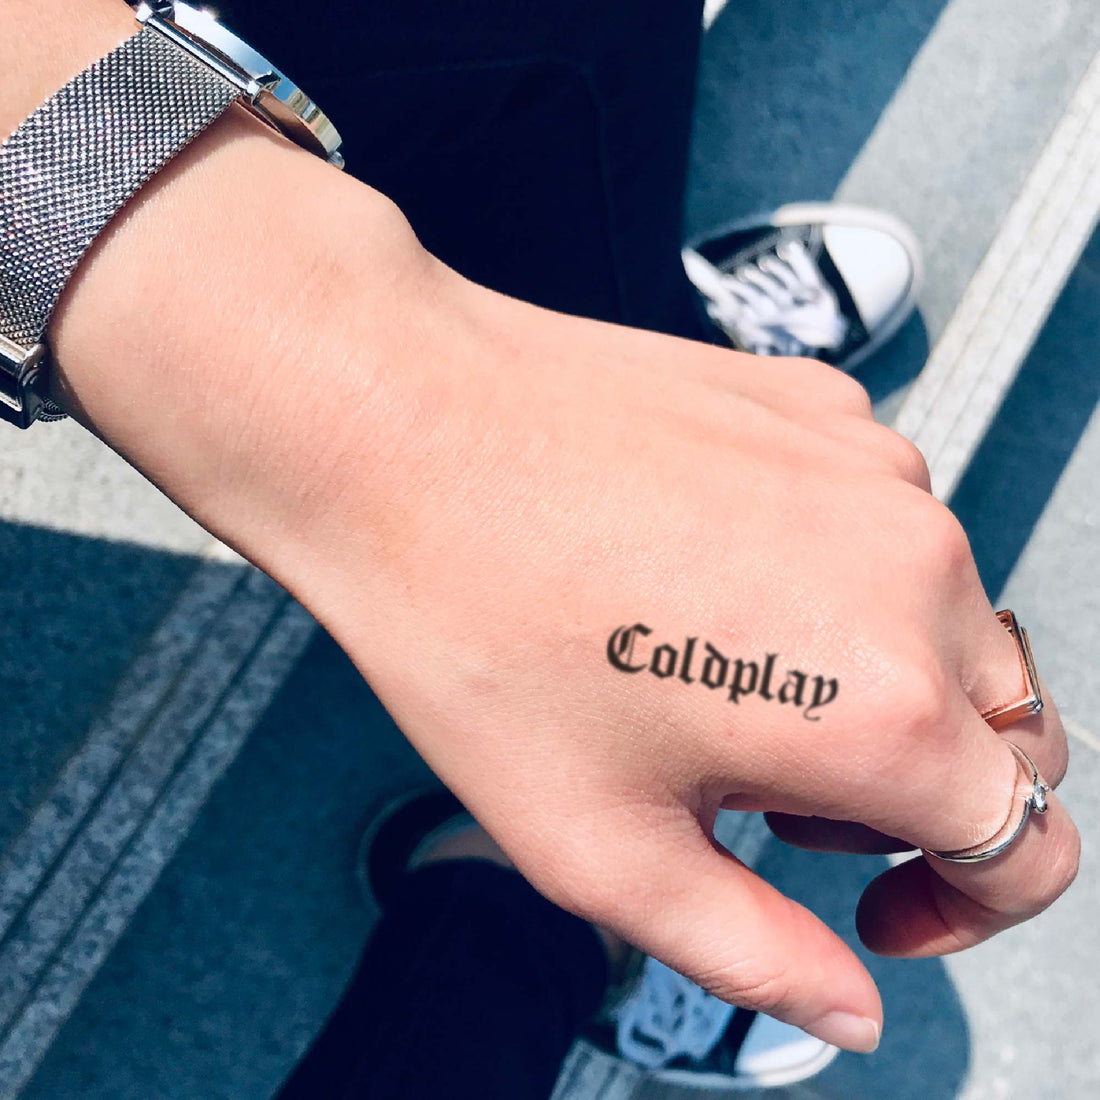 Coldplay custom temporary tattoo sticker design idea inspiration meanings removal arm wrist hand words font name signature calligraphy lyrics tour concert outfits merch accessory gift souvenir costumes wear dress up code